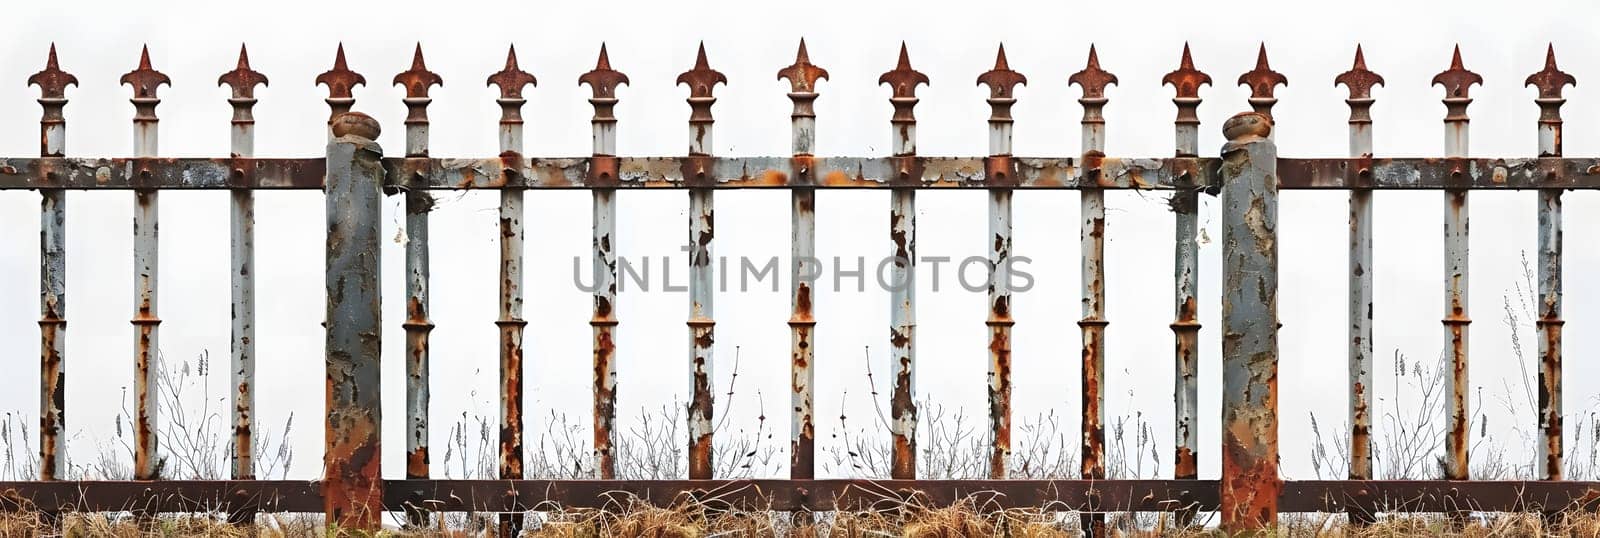 Rusty metal fence with crosses design on white background by Nadtochiy